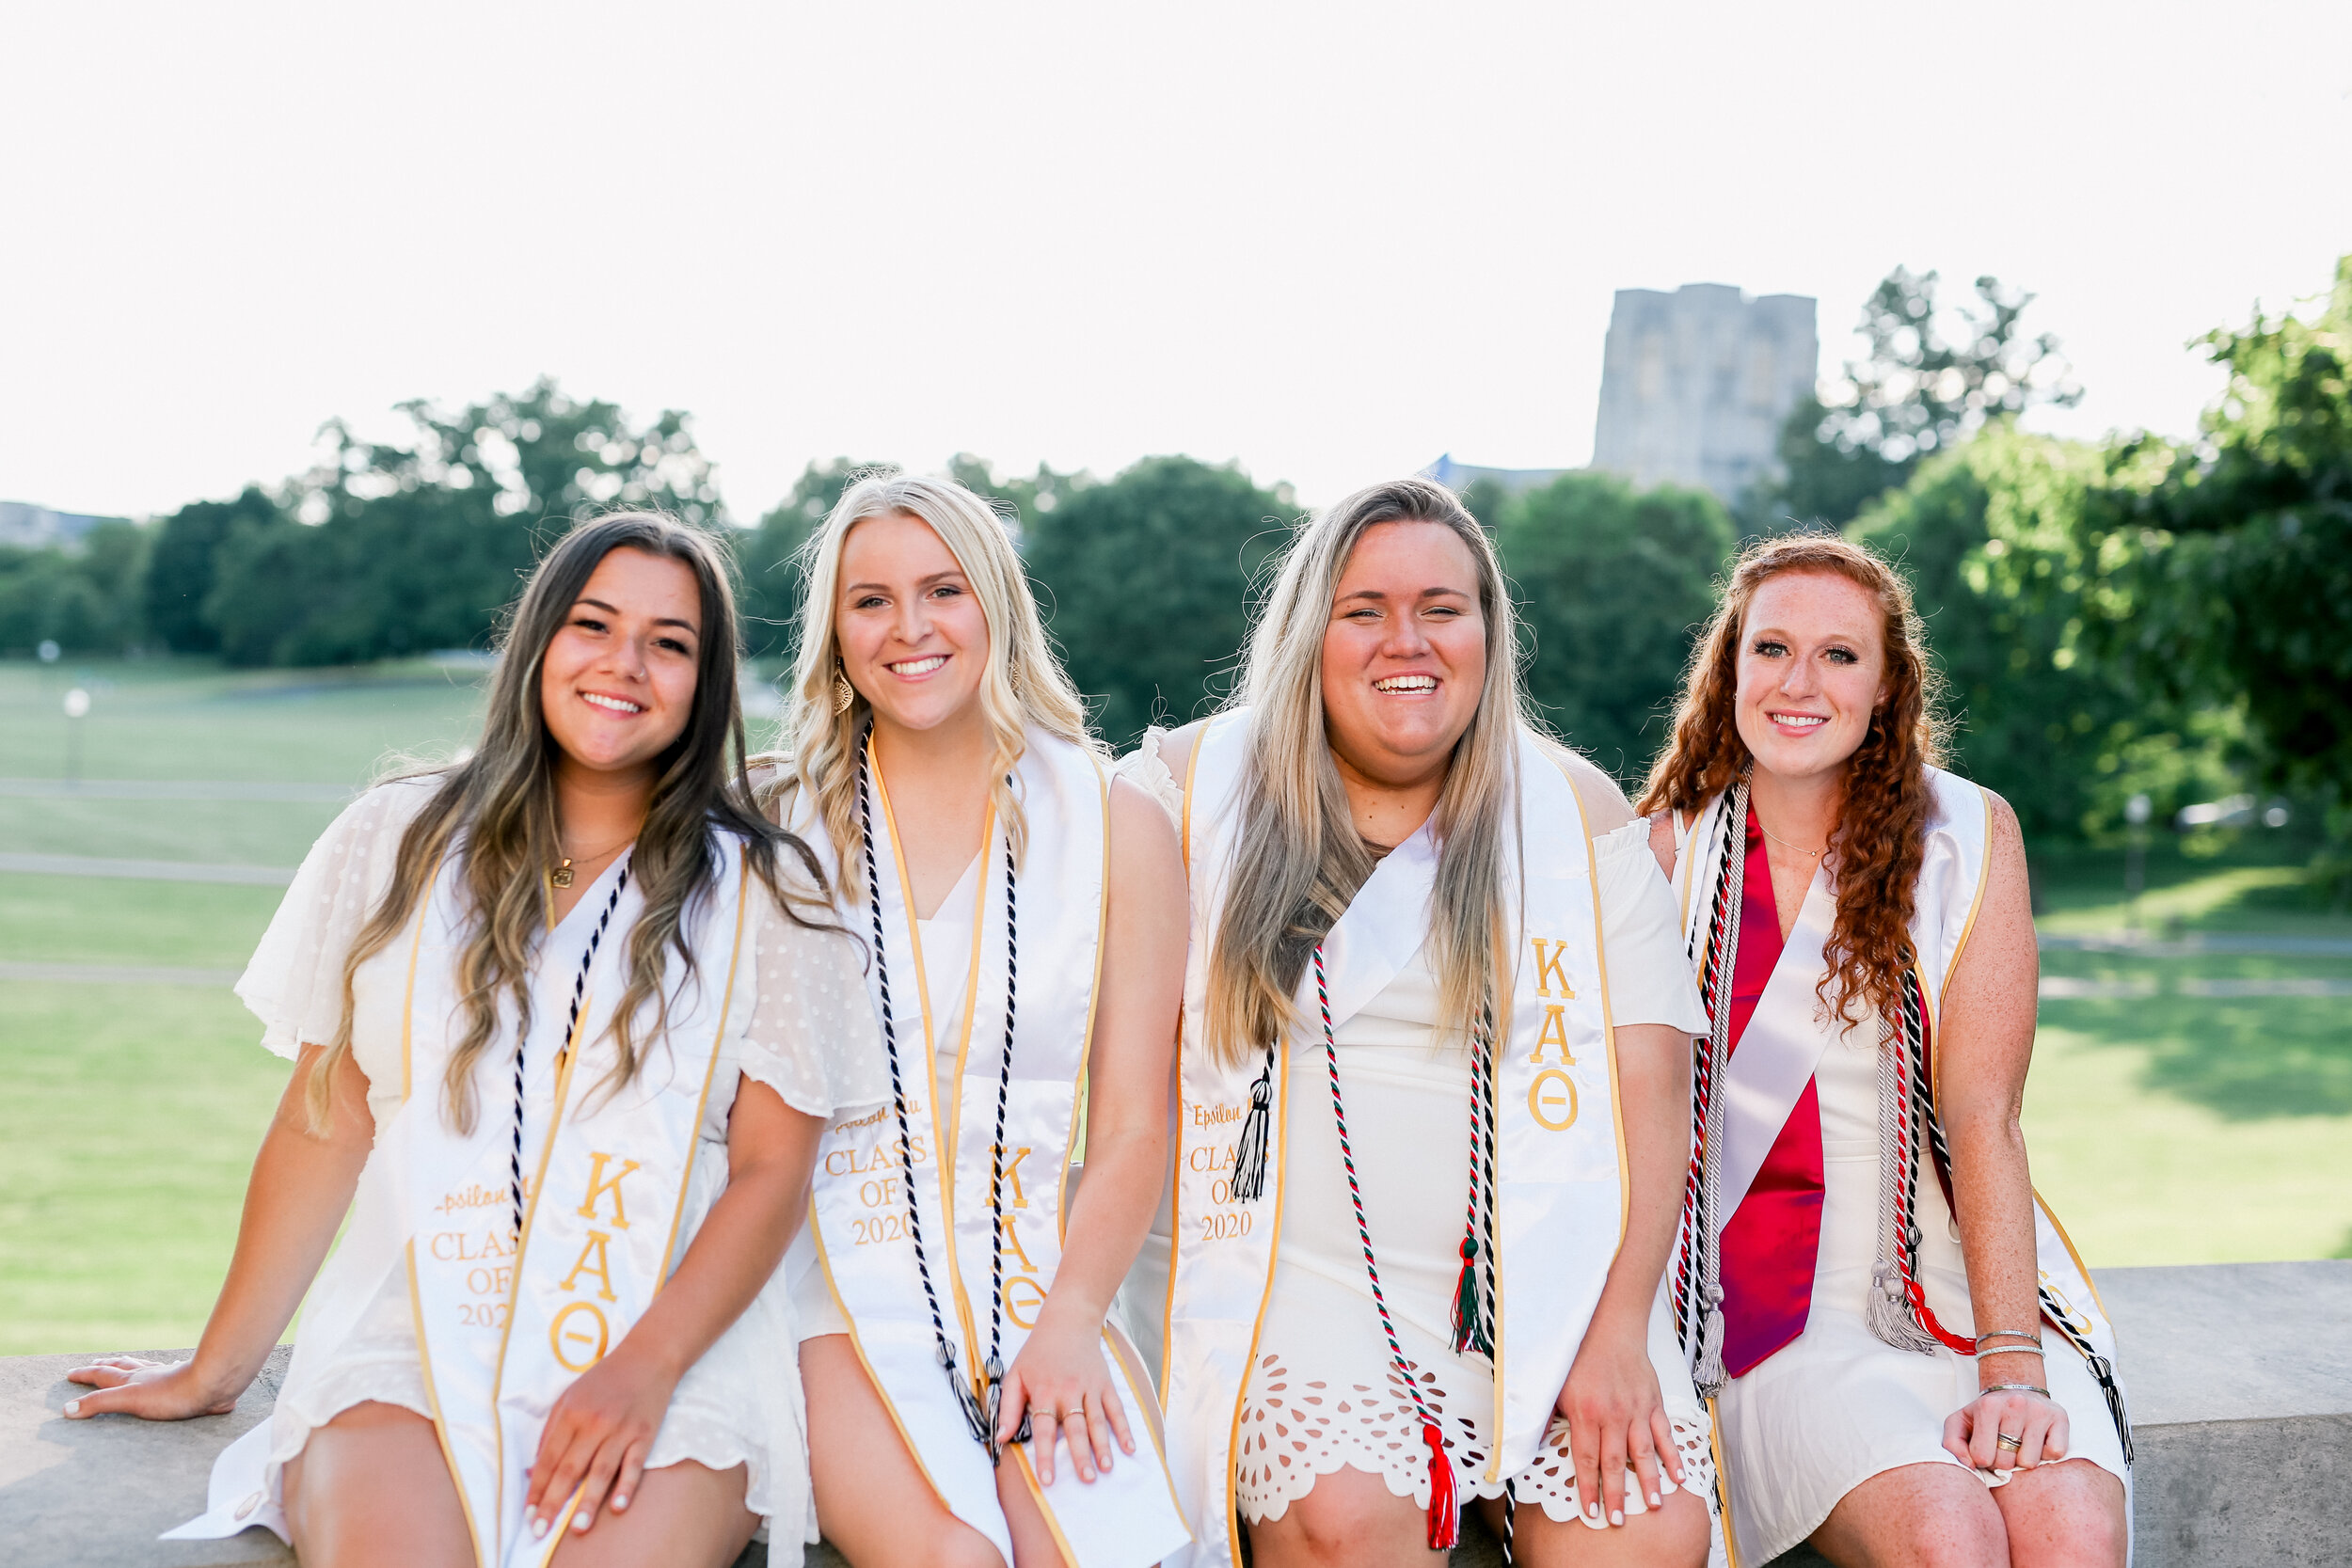 Group graduation pictures on Virginia Tech’s campus photoshoot